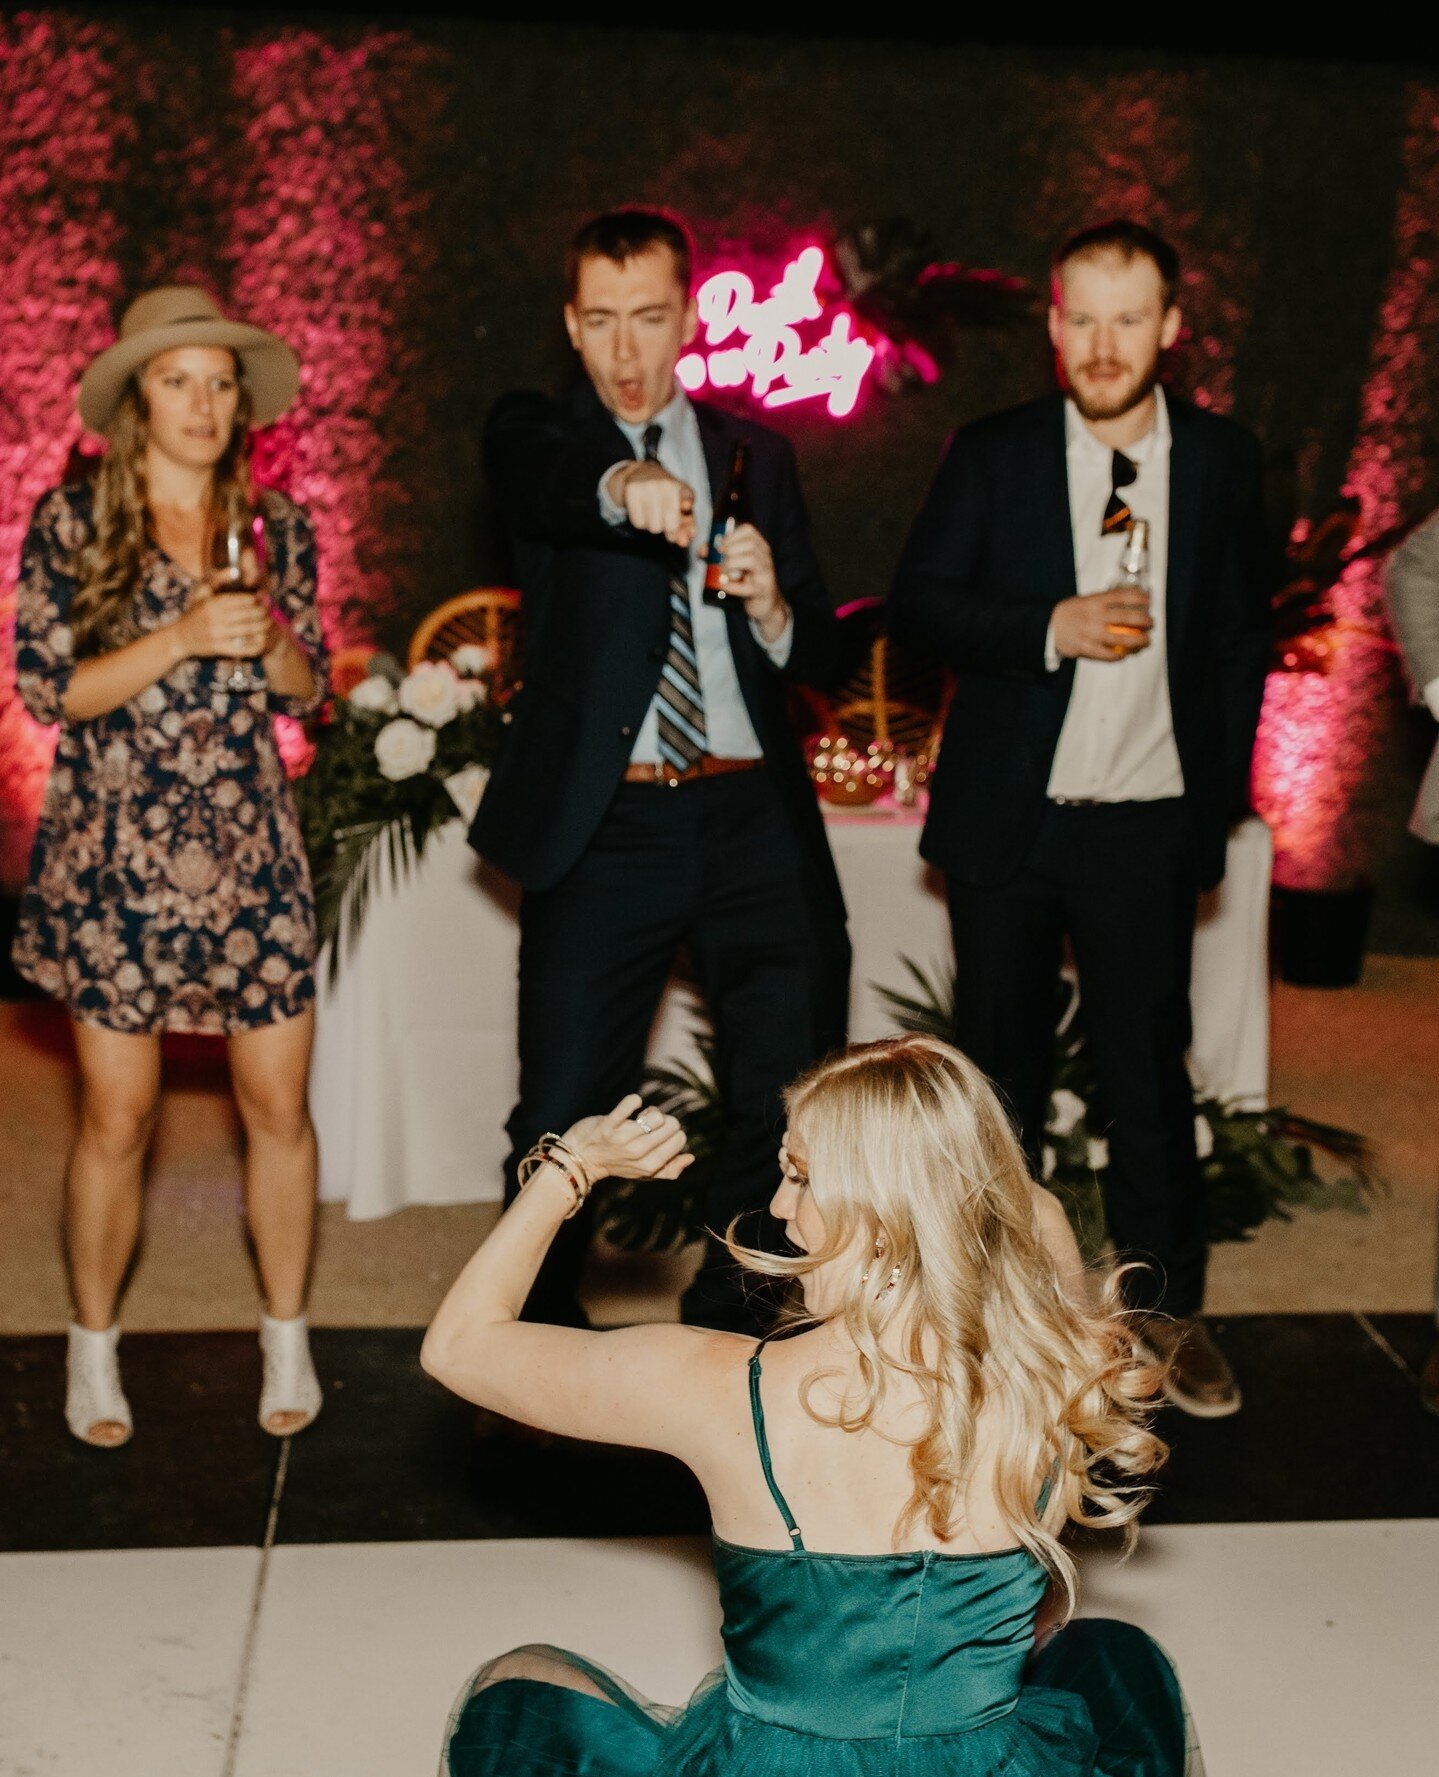 Who says you can't drop it low at a wedding!? We certainly don't!!! Get on the floor and do you, girl! ⁠
⁠
⁠
Photo: @cassidyskyephoto⁠
Venue: @thelautnercompound